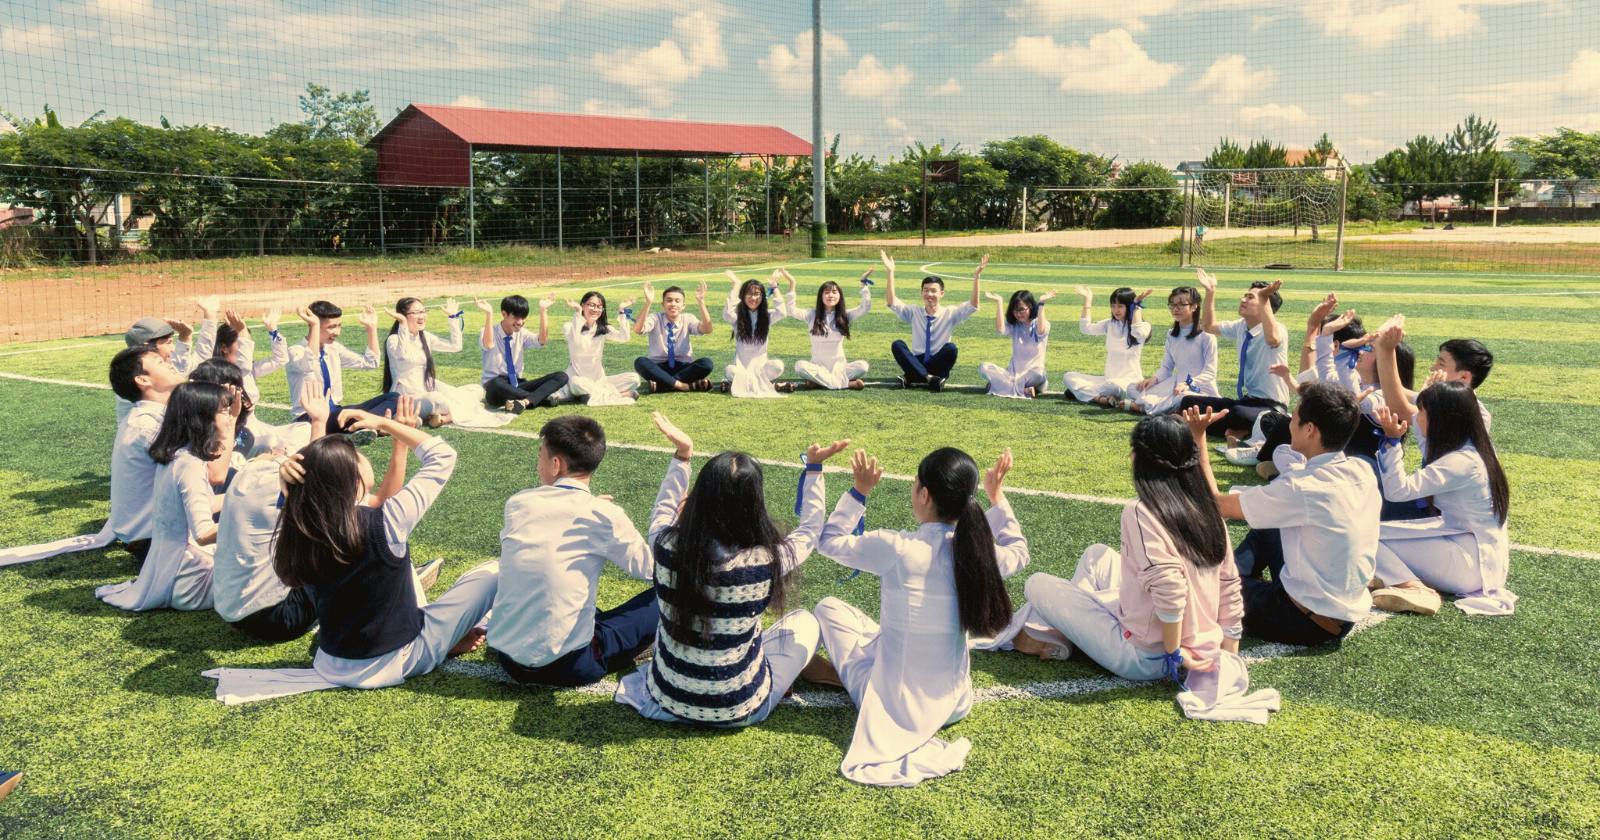 Middle schoolers doing a mindfulness activity outside in a field